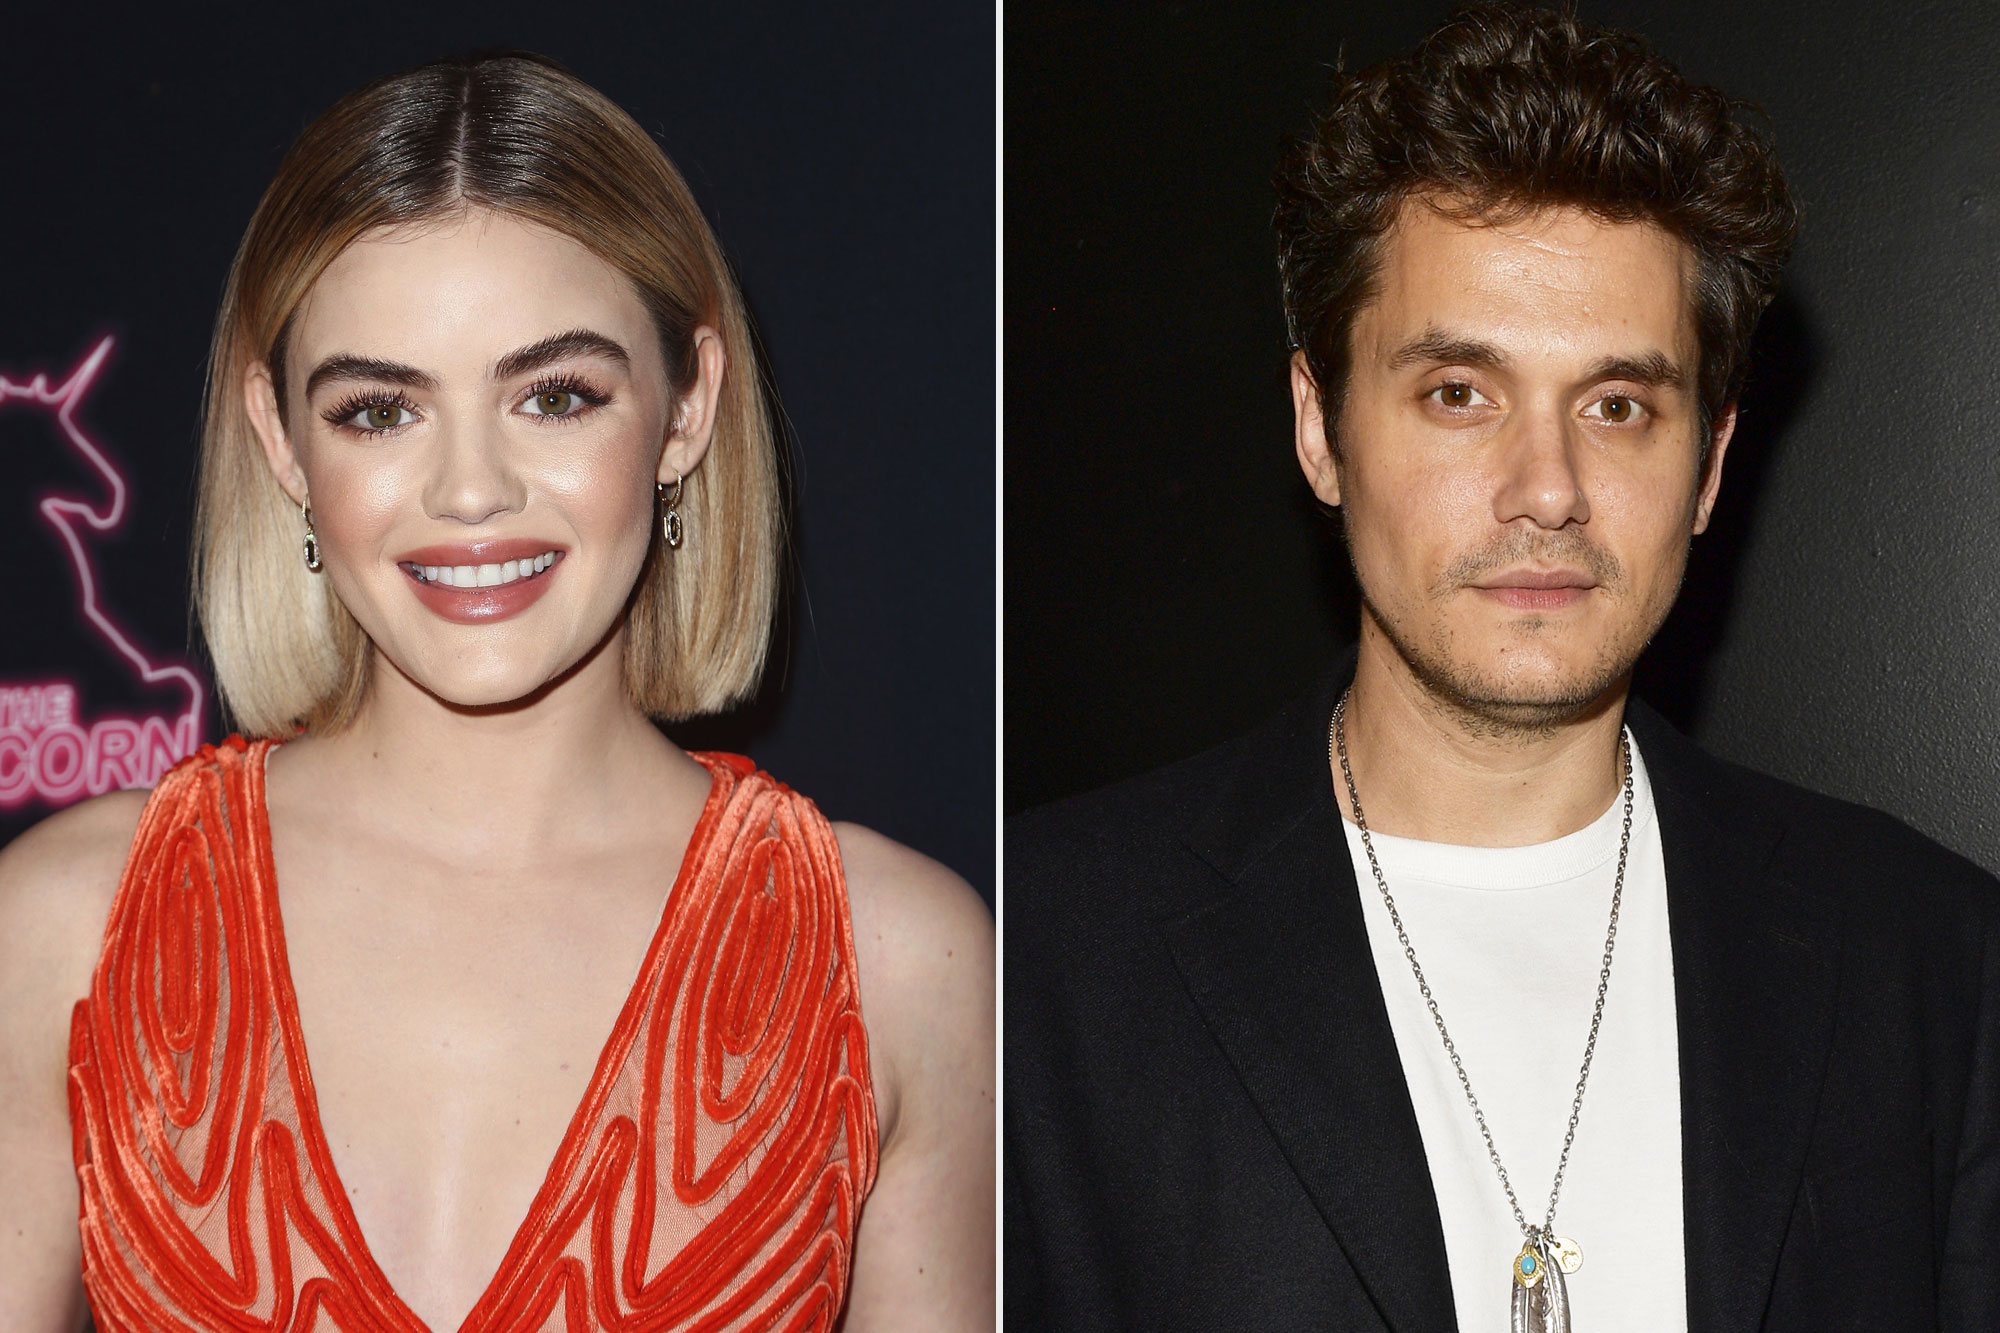 Lucy Hale says she once tried to connect with John Mayer on dating app